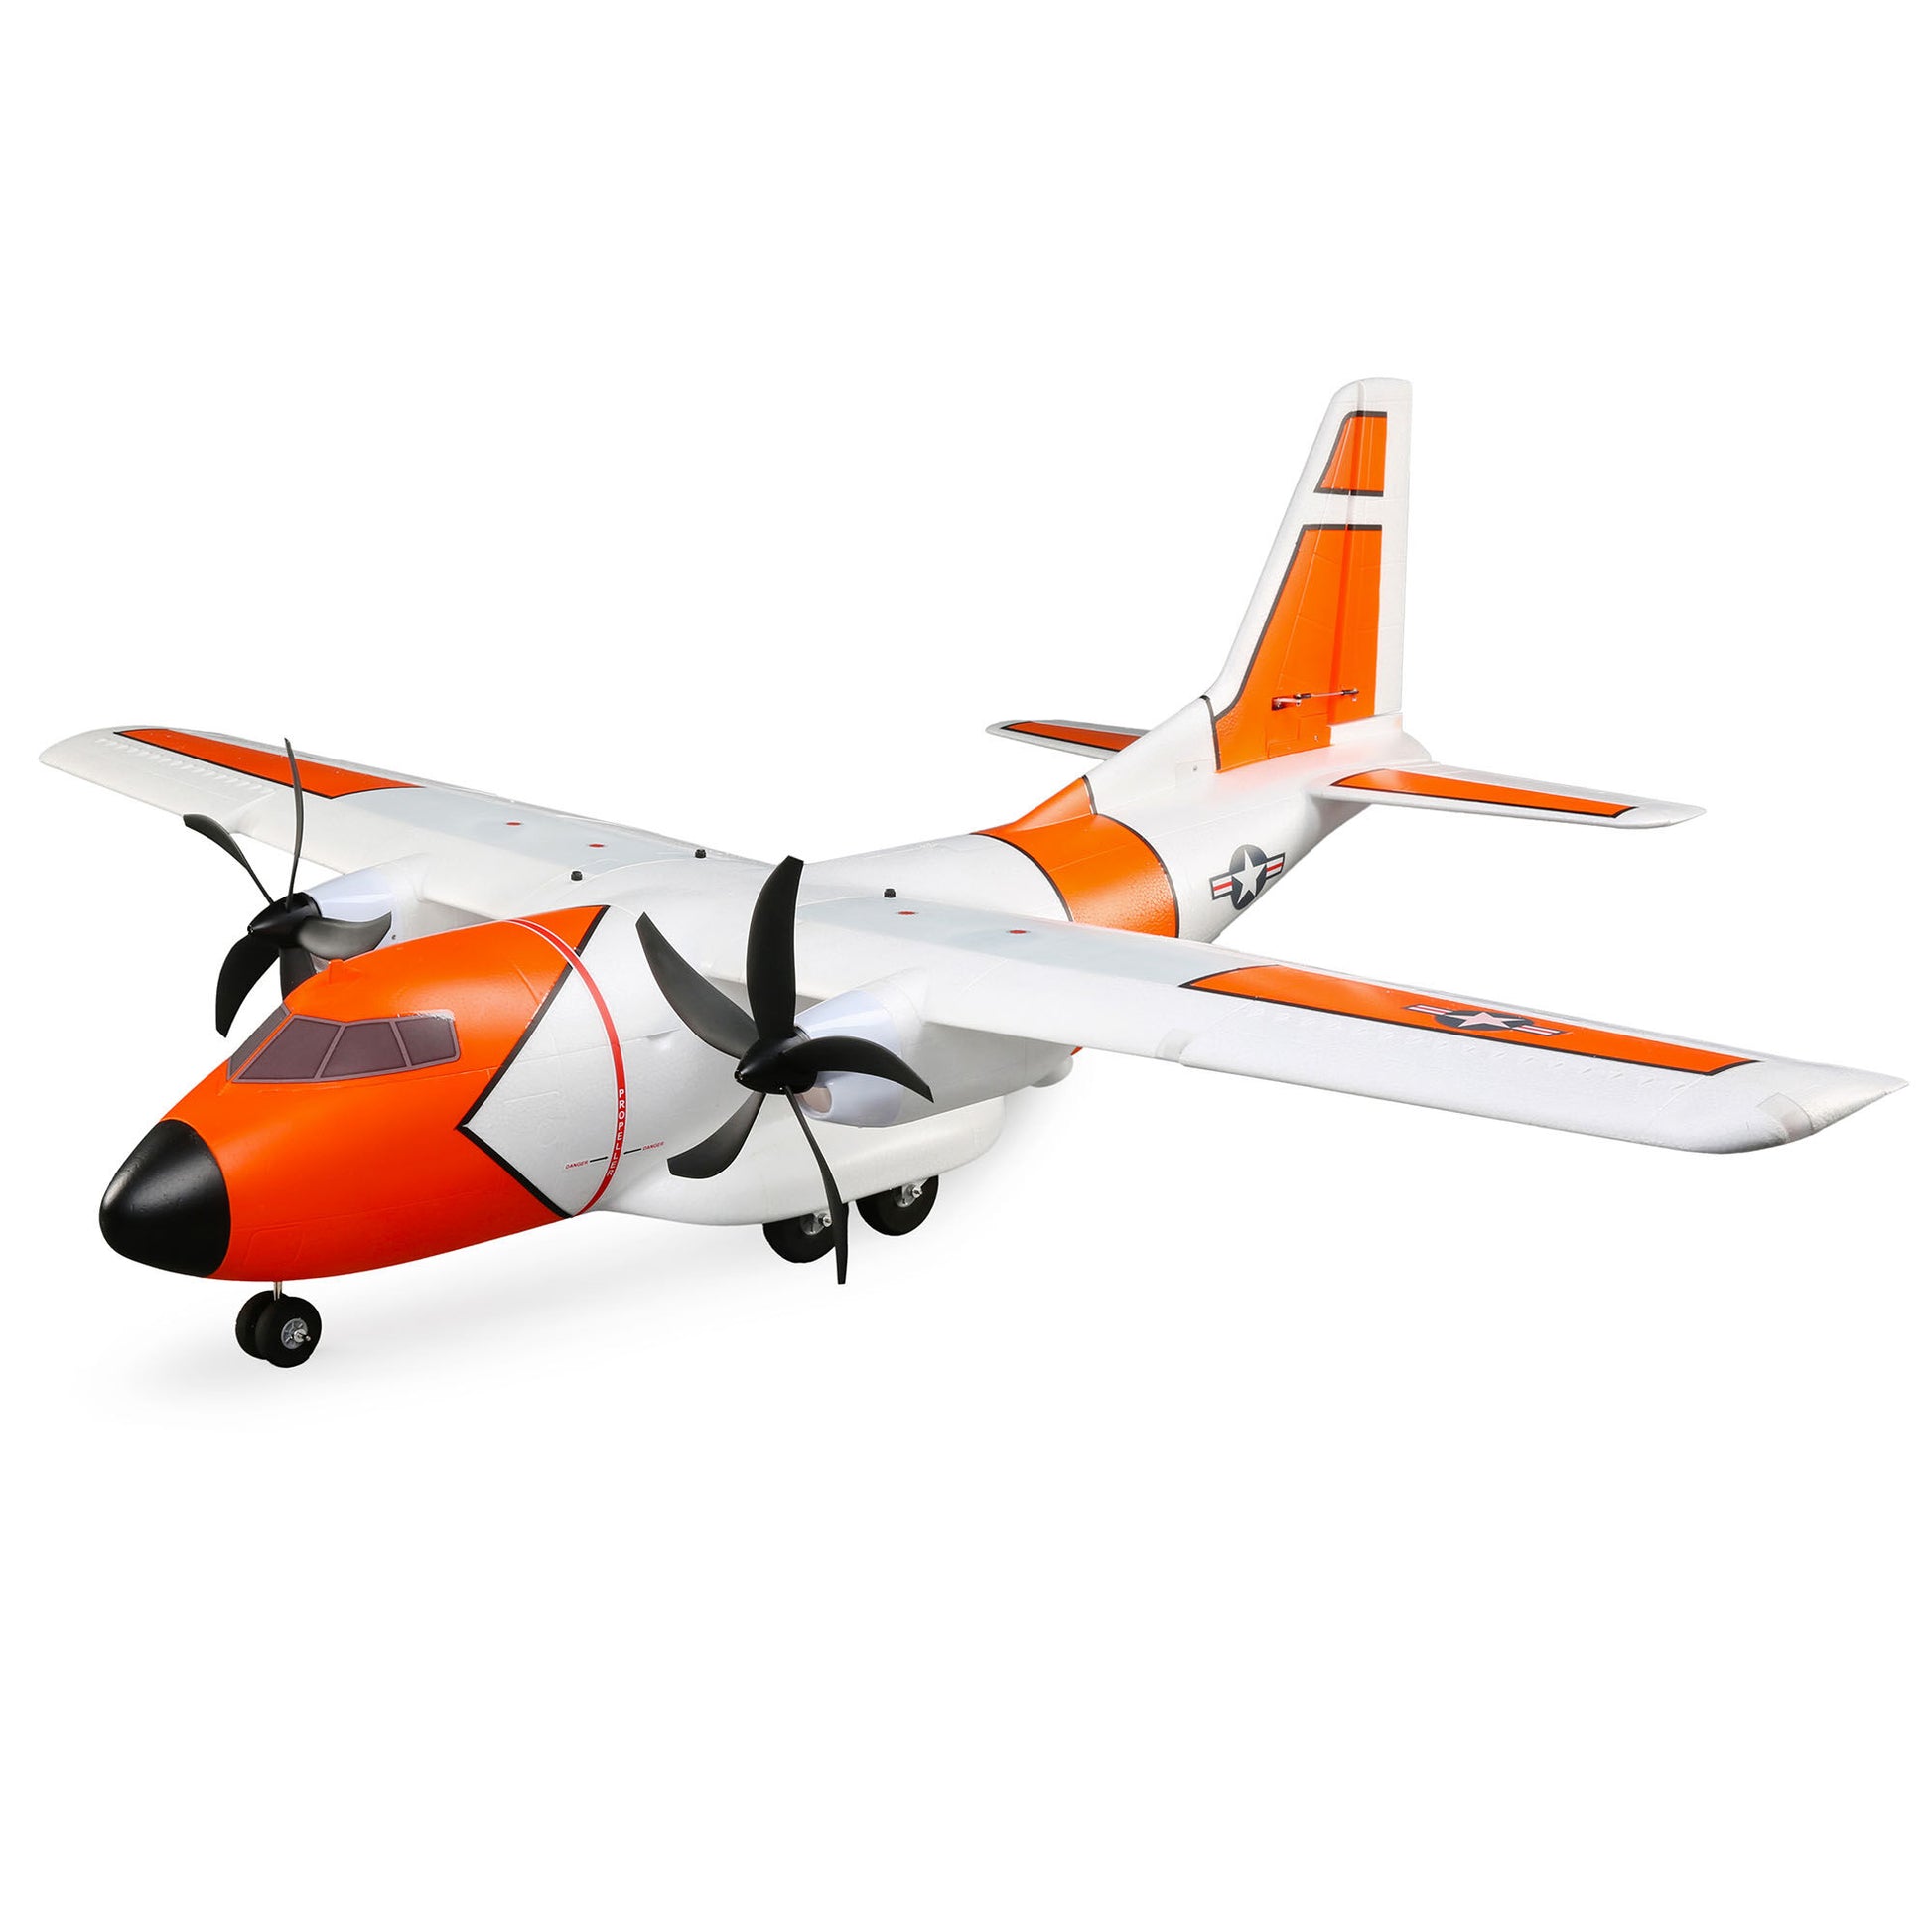 E-flite EC-1500 Twin 1.5m BNF Basic with AS3X and SAFE Select EFL5750